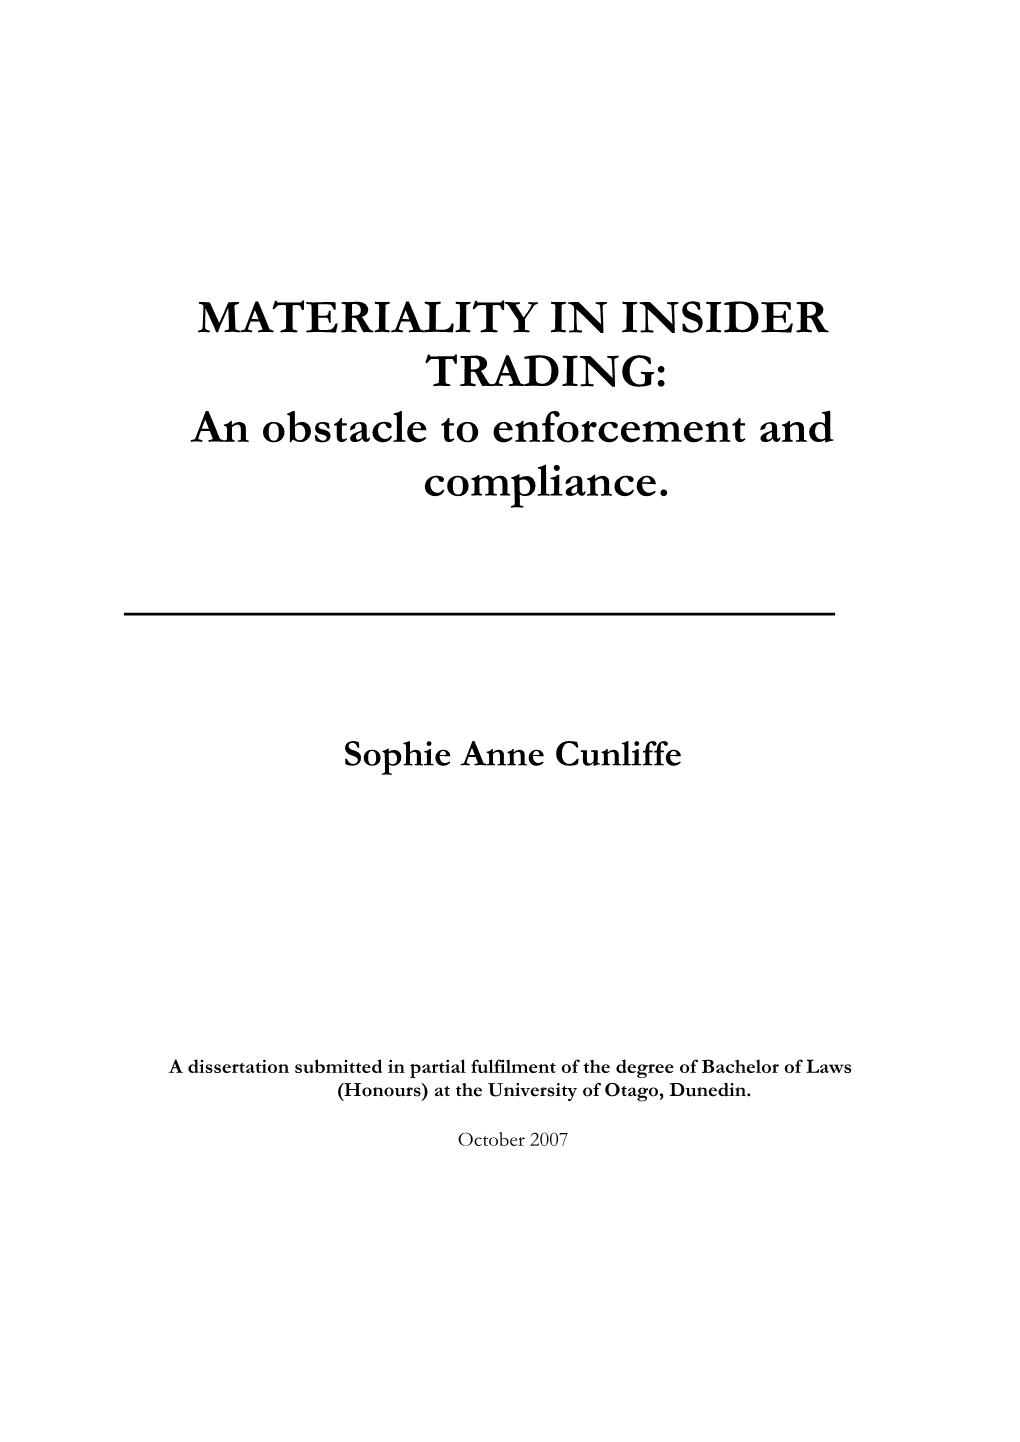 MATERIALITY in INSIDER TRADING: an Obstacle to Enforcement and Compliance